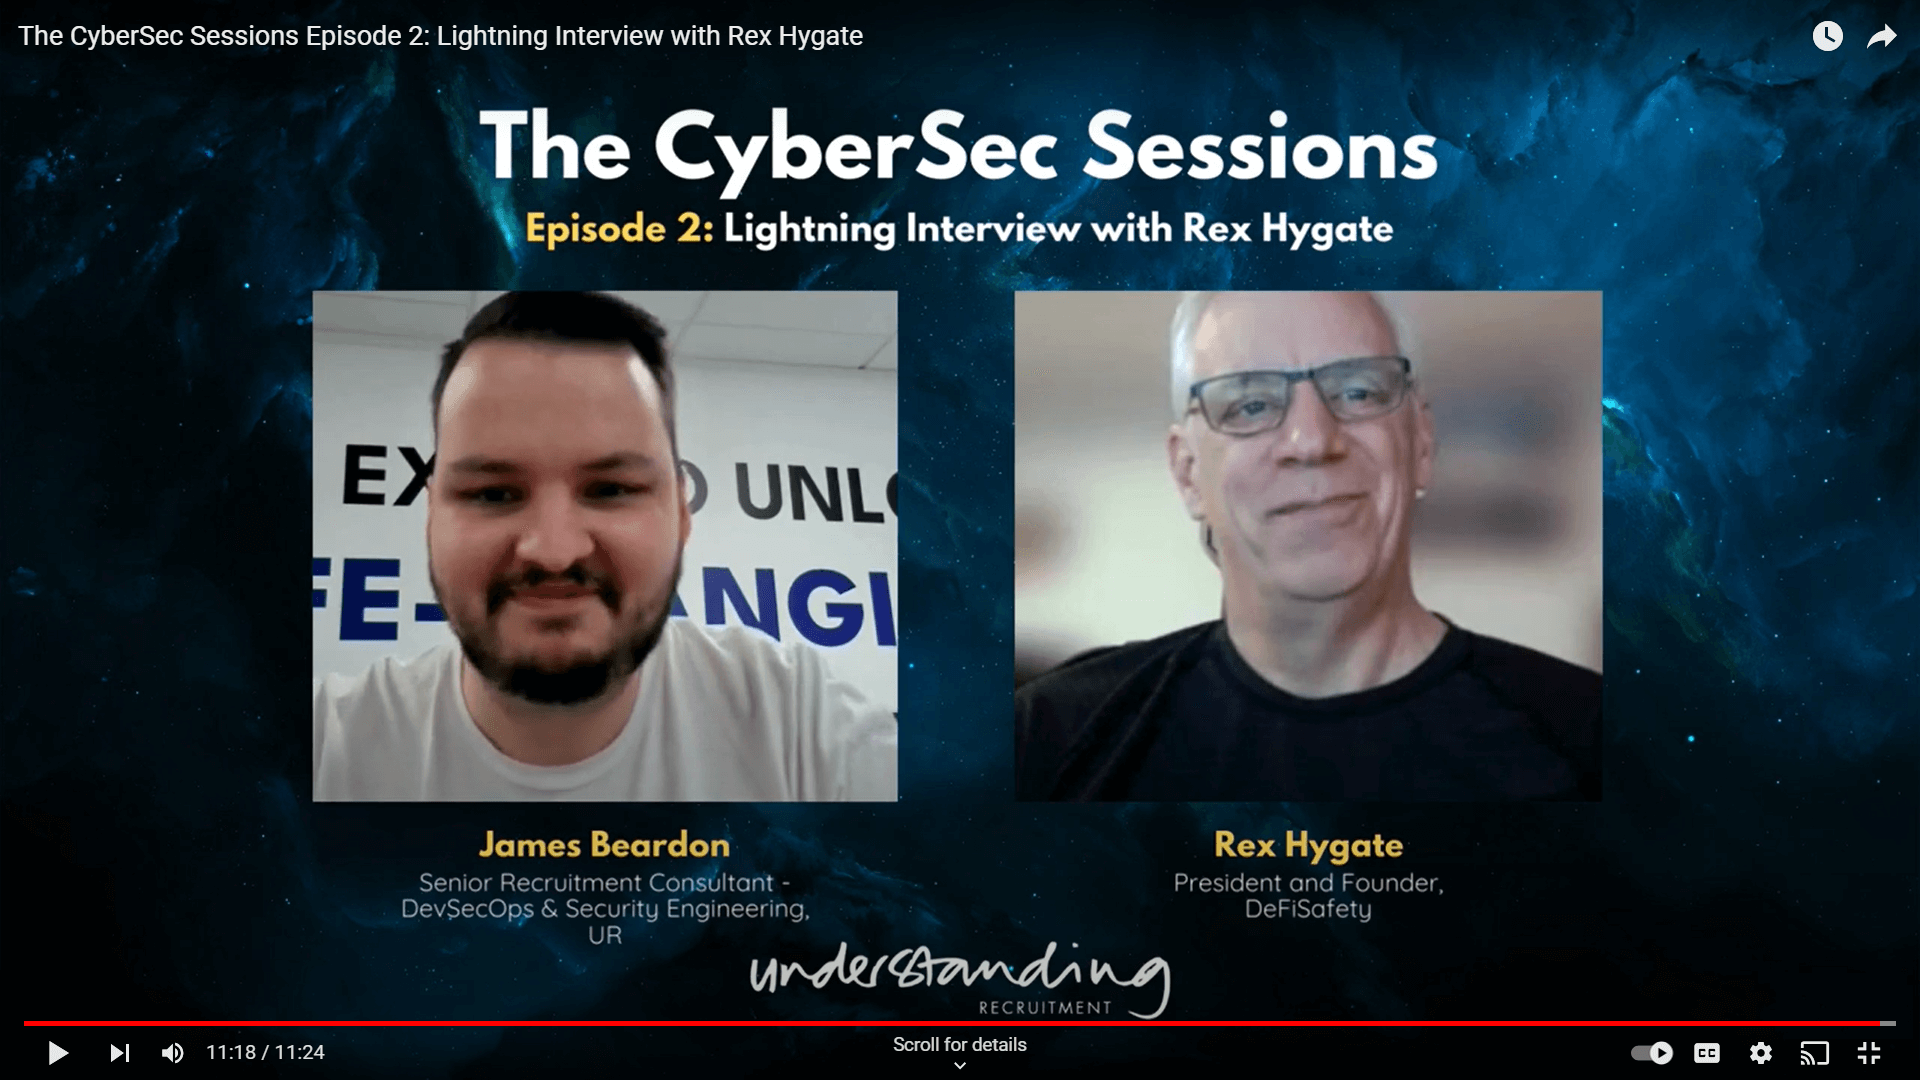 The CyberSec Sessions Episode 2: Lightning Interview with Rex Hygate